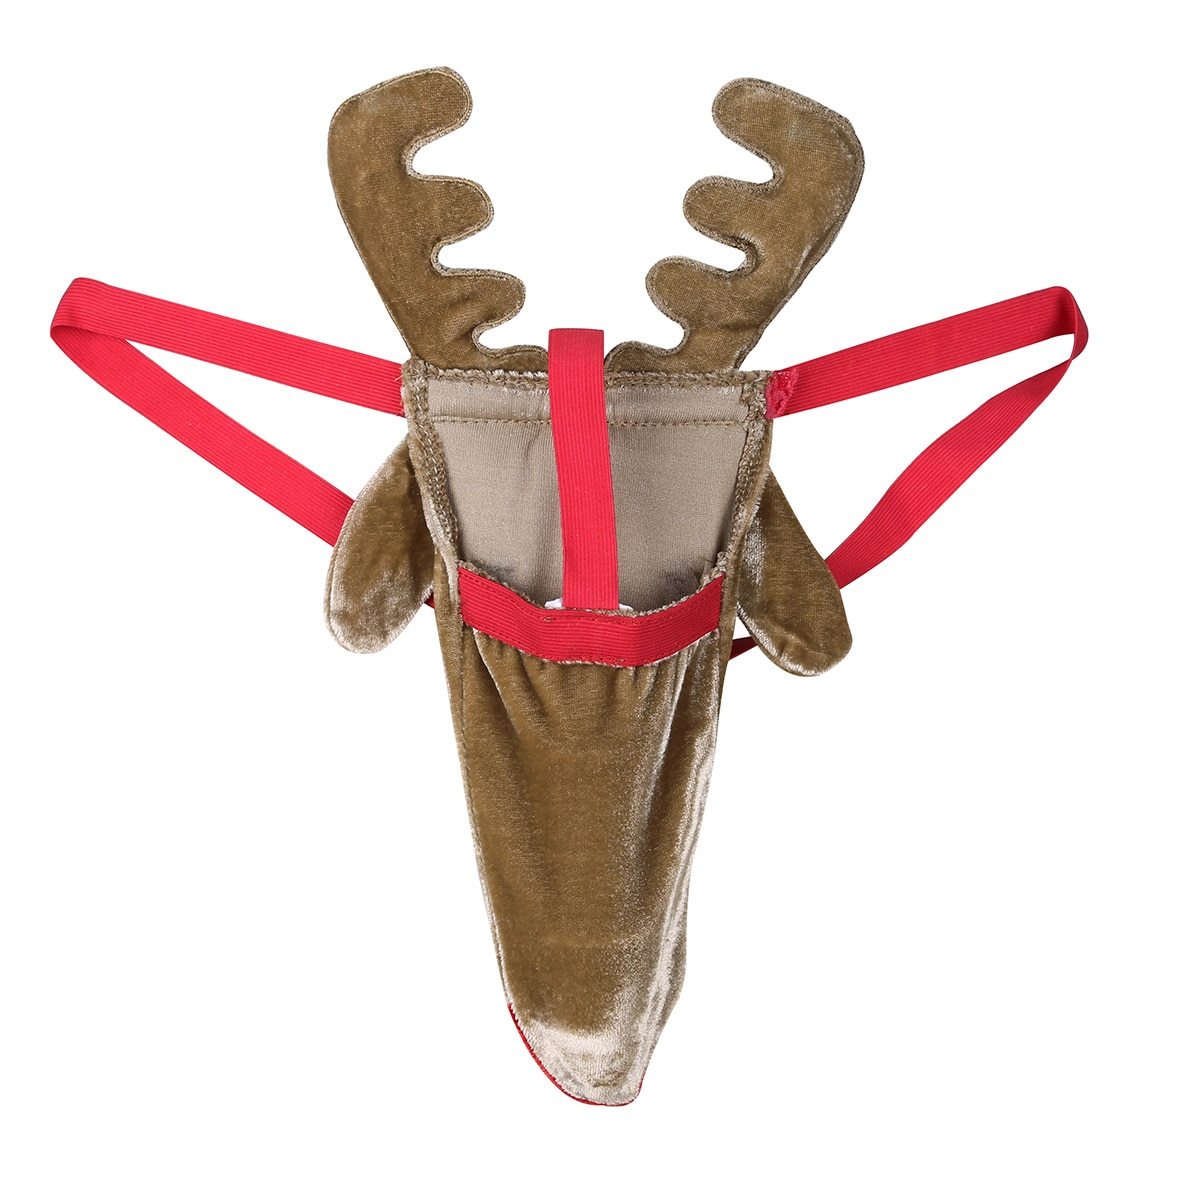 XMAS  GIFT - Mens Male Fun Lingerie Christmas Reindeer Pouch G string